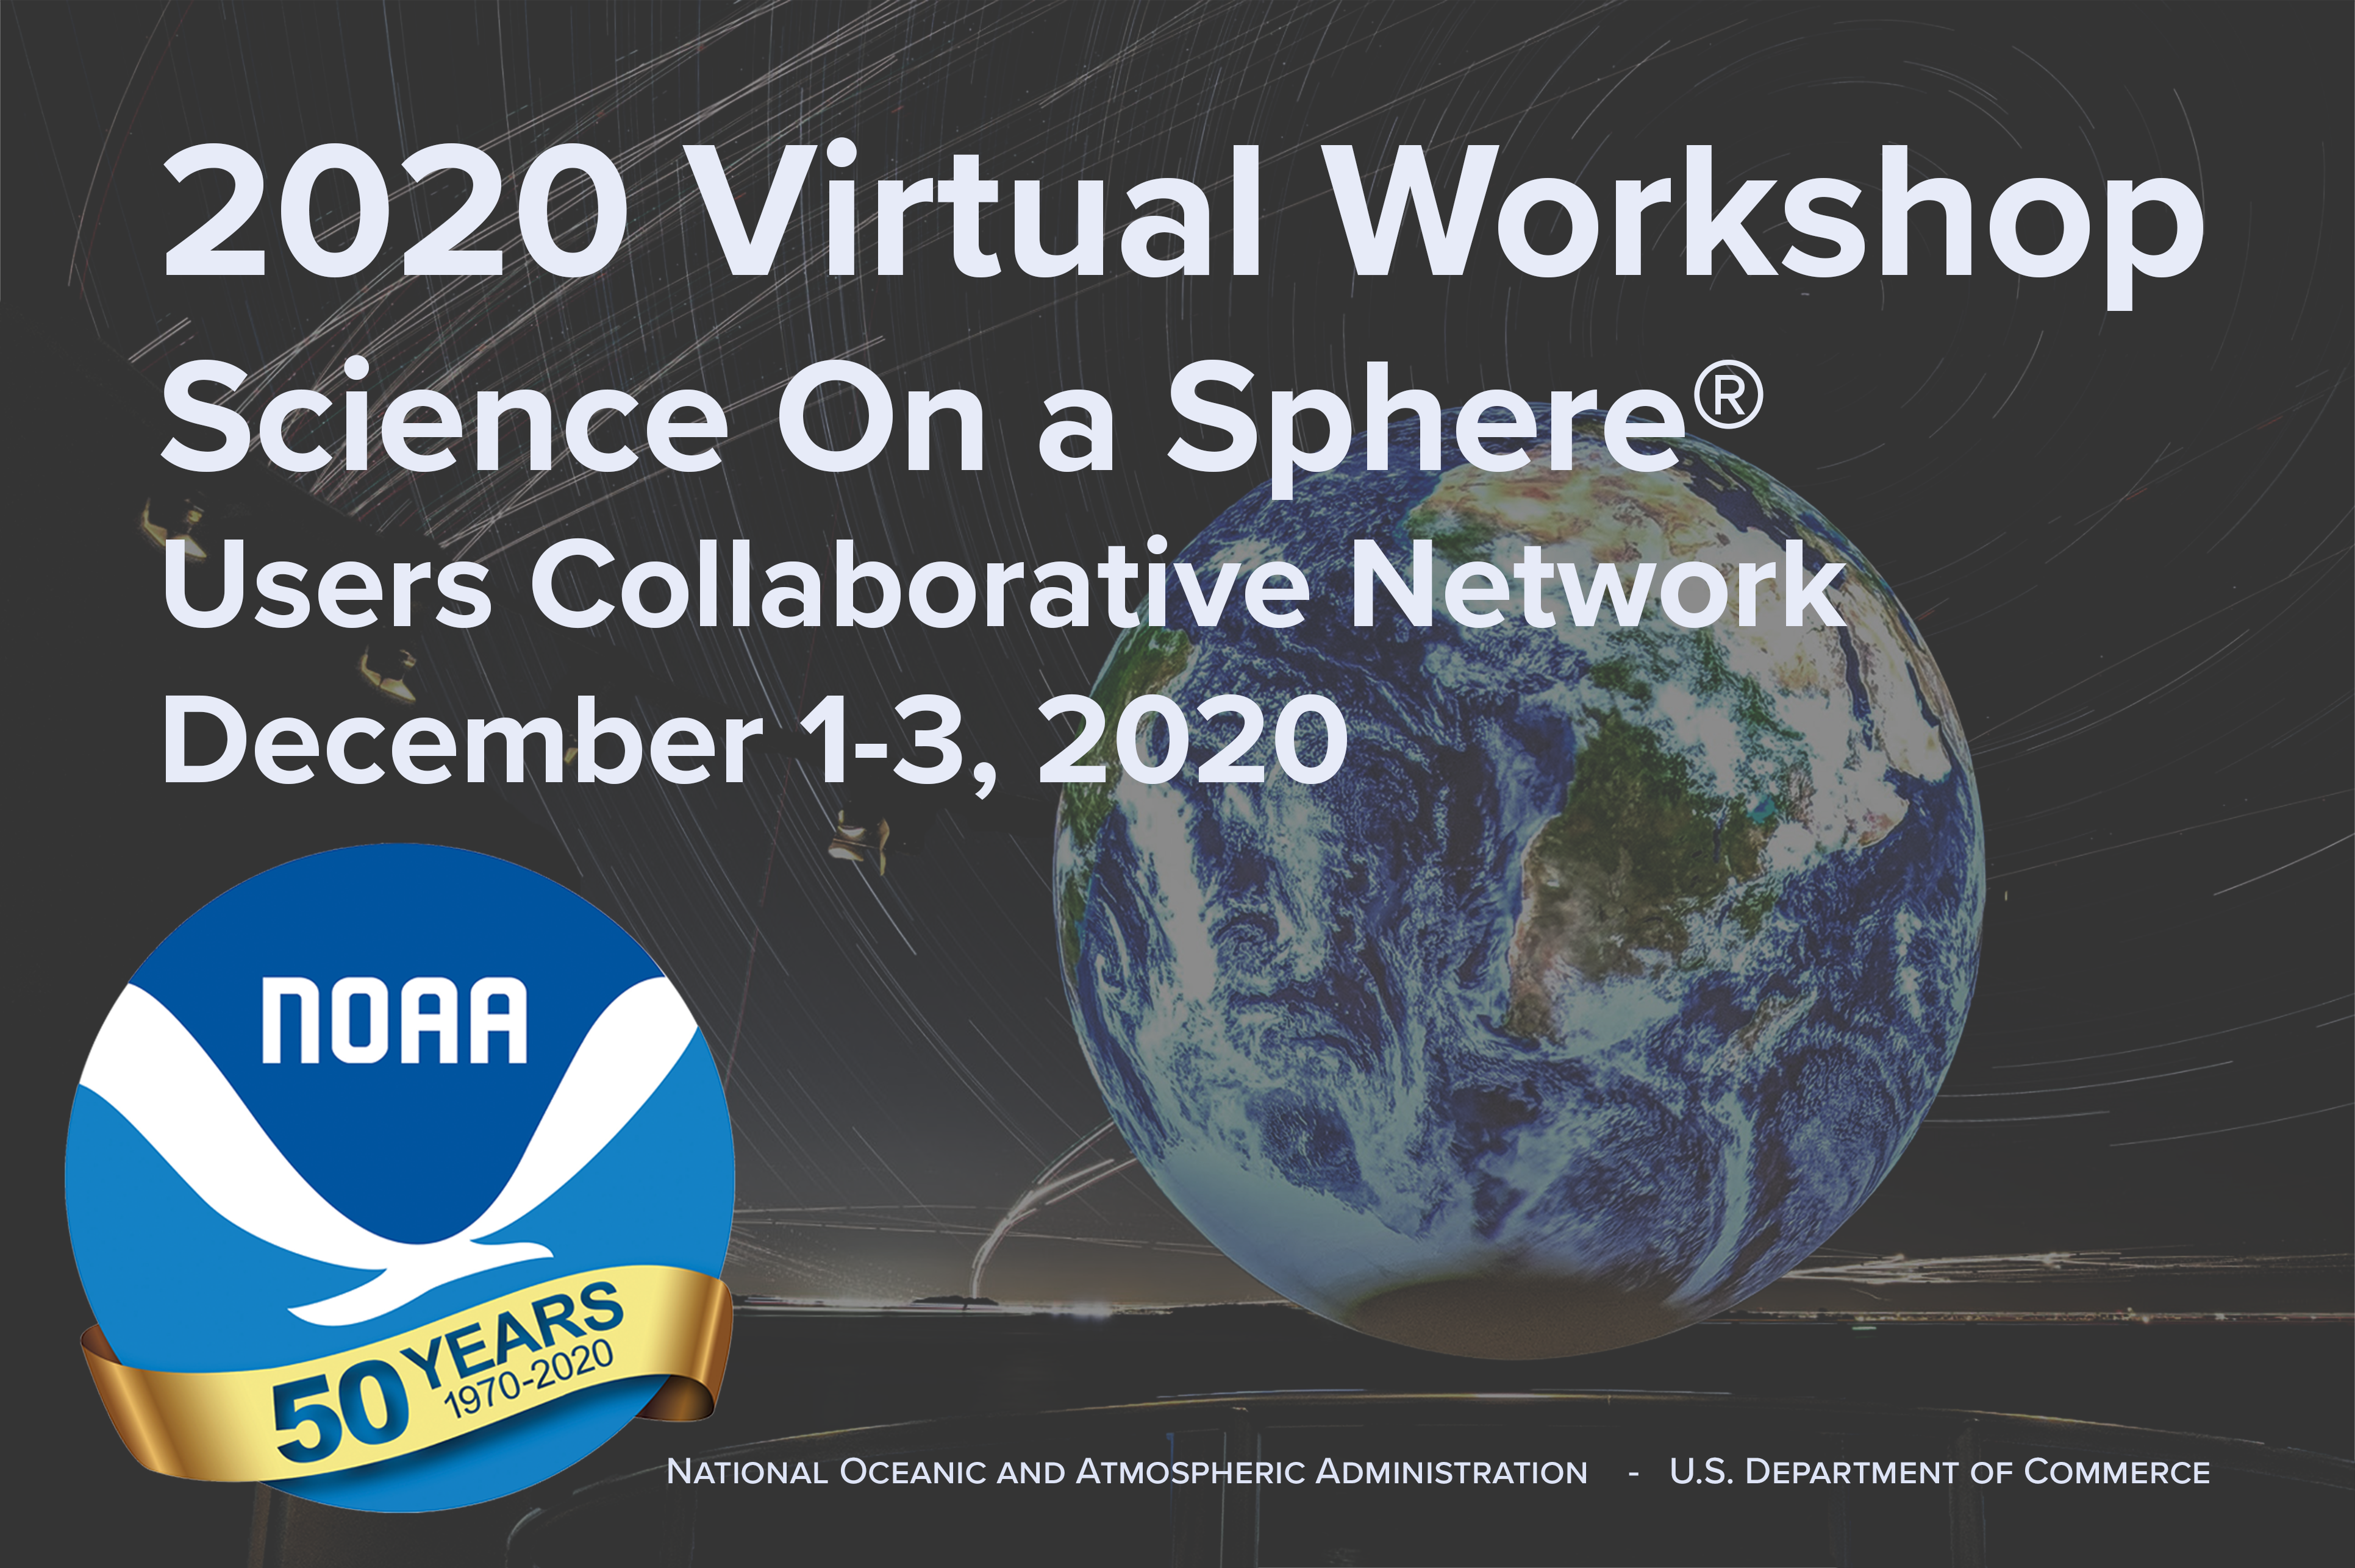 This figure advertises the 2020 Virtual Workshop for Science On a Sphere Users Collaborative Network. Text reads, from top to bottom, "2020 Virtual Workshop for Science On a Sphere Users Collaborative Network, December 1st through 3rd, 2020." The National Oceanic and Atmospheric Administration 50th anniversary logo is on the lower left side of the figure, next to text that reads "National Oceanic and Atmospheric Administration, U.S. Department of Commerce."  All of the text and logo mentioned is